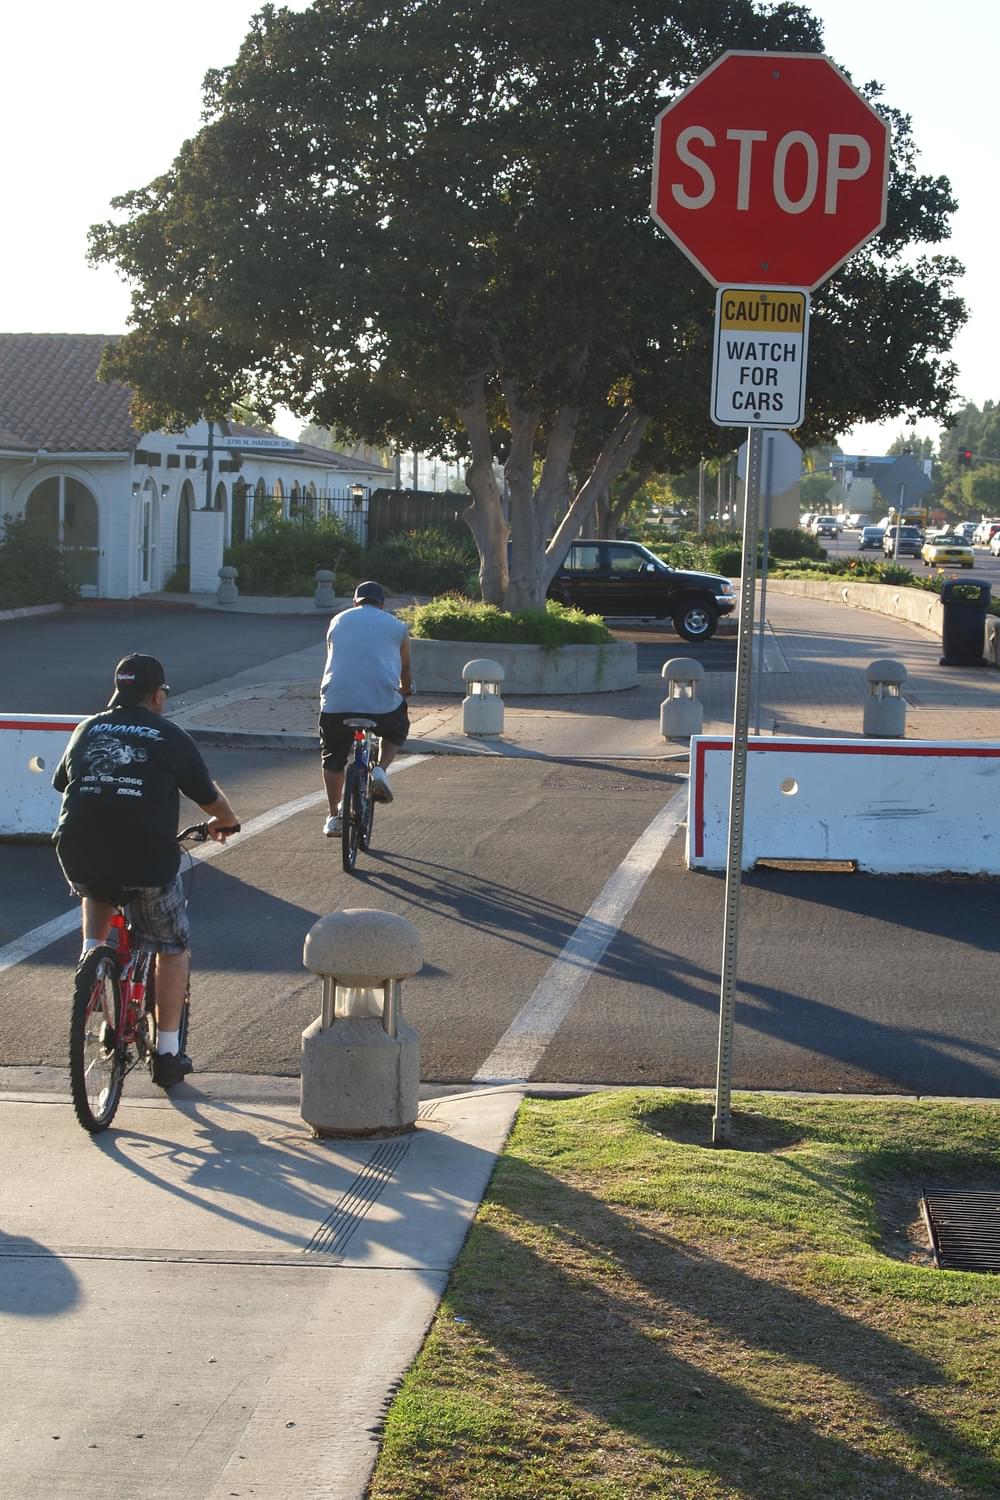 Where San Diego Harbor Trail crosses high-volume Coast Guard entrance, stop sign as well as "Caution watch for cars" sign warn trail users